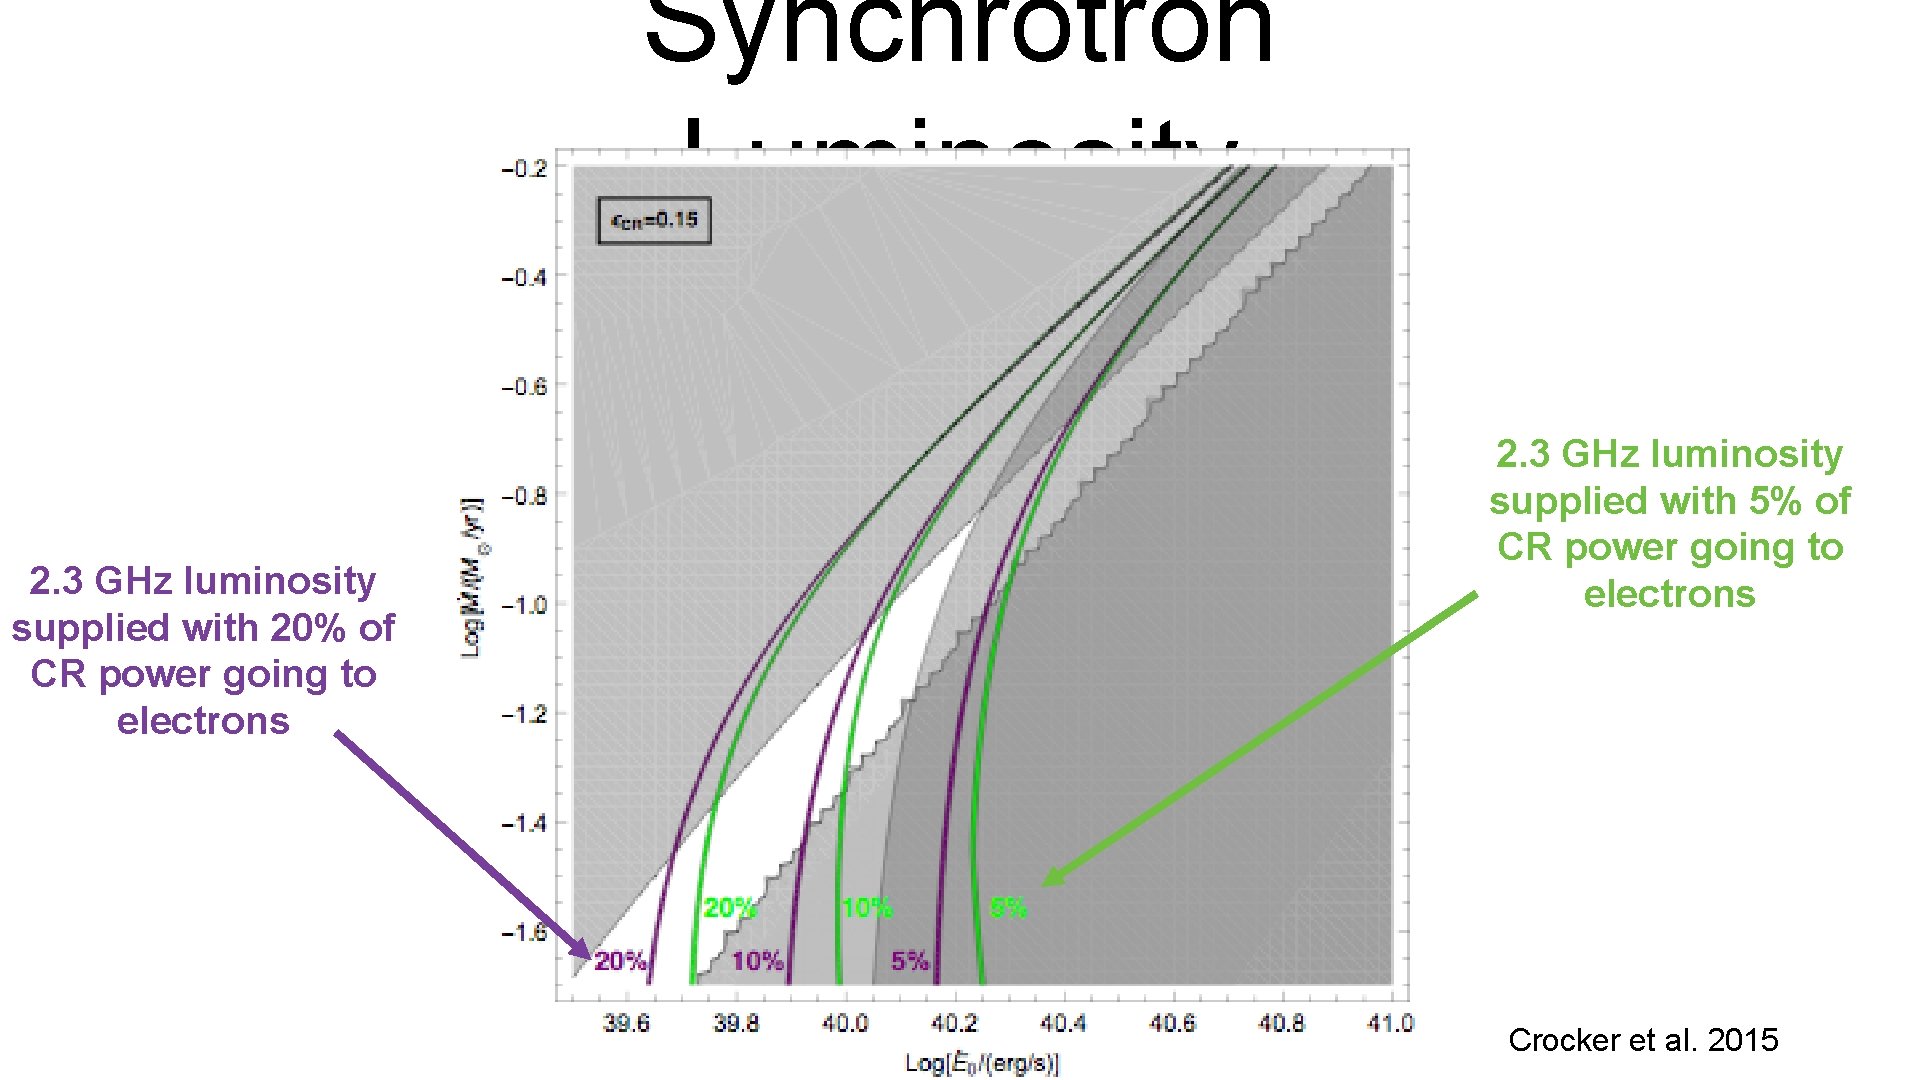 Synchrotron Luminosity 2. 3 GHz luminosity supplied with 20% of CR power going to